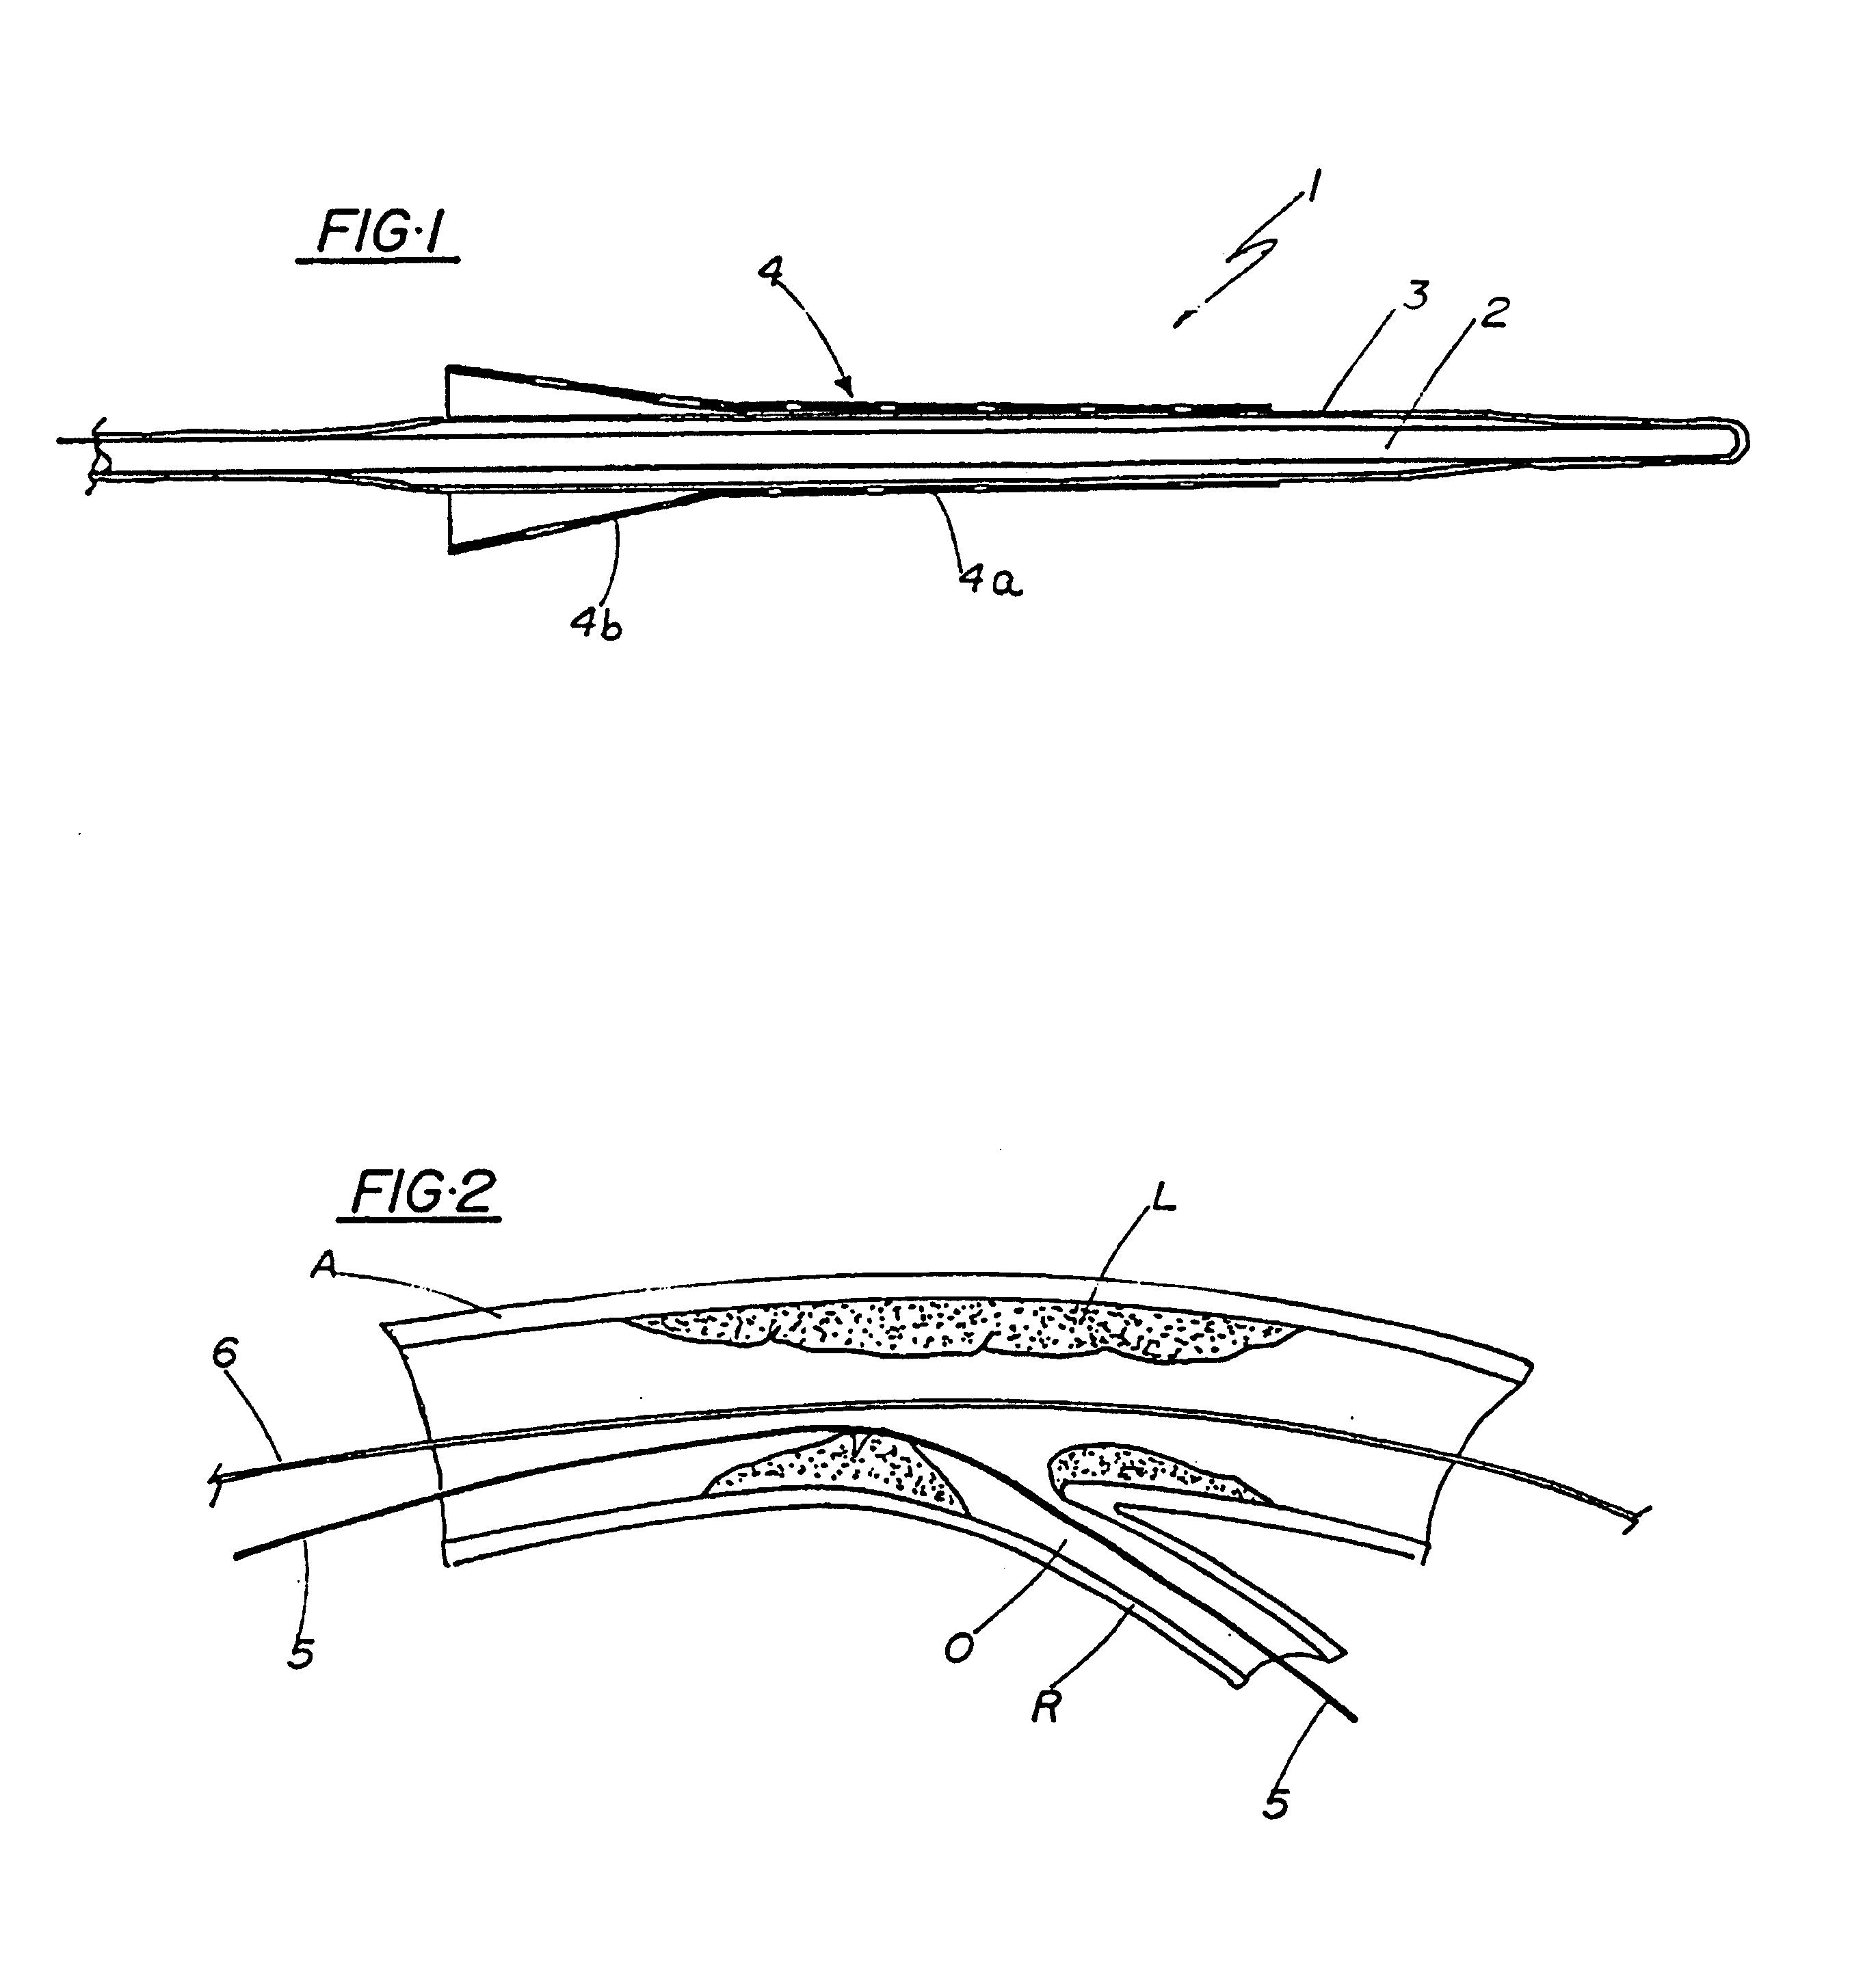 Device for disobstruction of ateriosclerotic lesions which incorporate the origin of lateral branches, or which are located in bifurcation of the coronary circulation, and respective interventionist process of placing such device